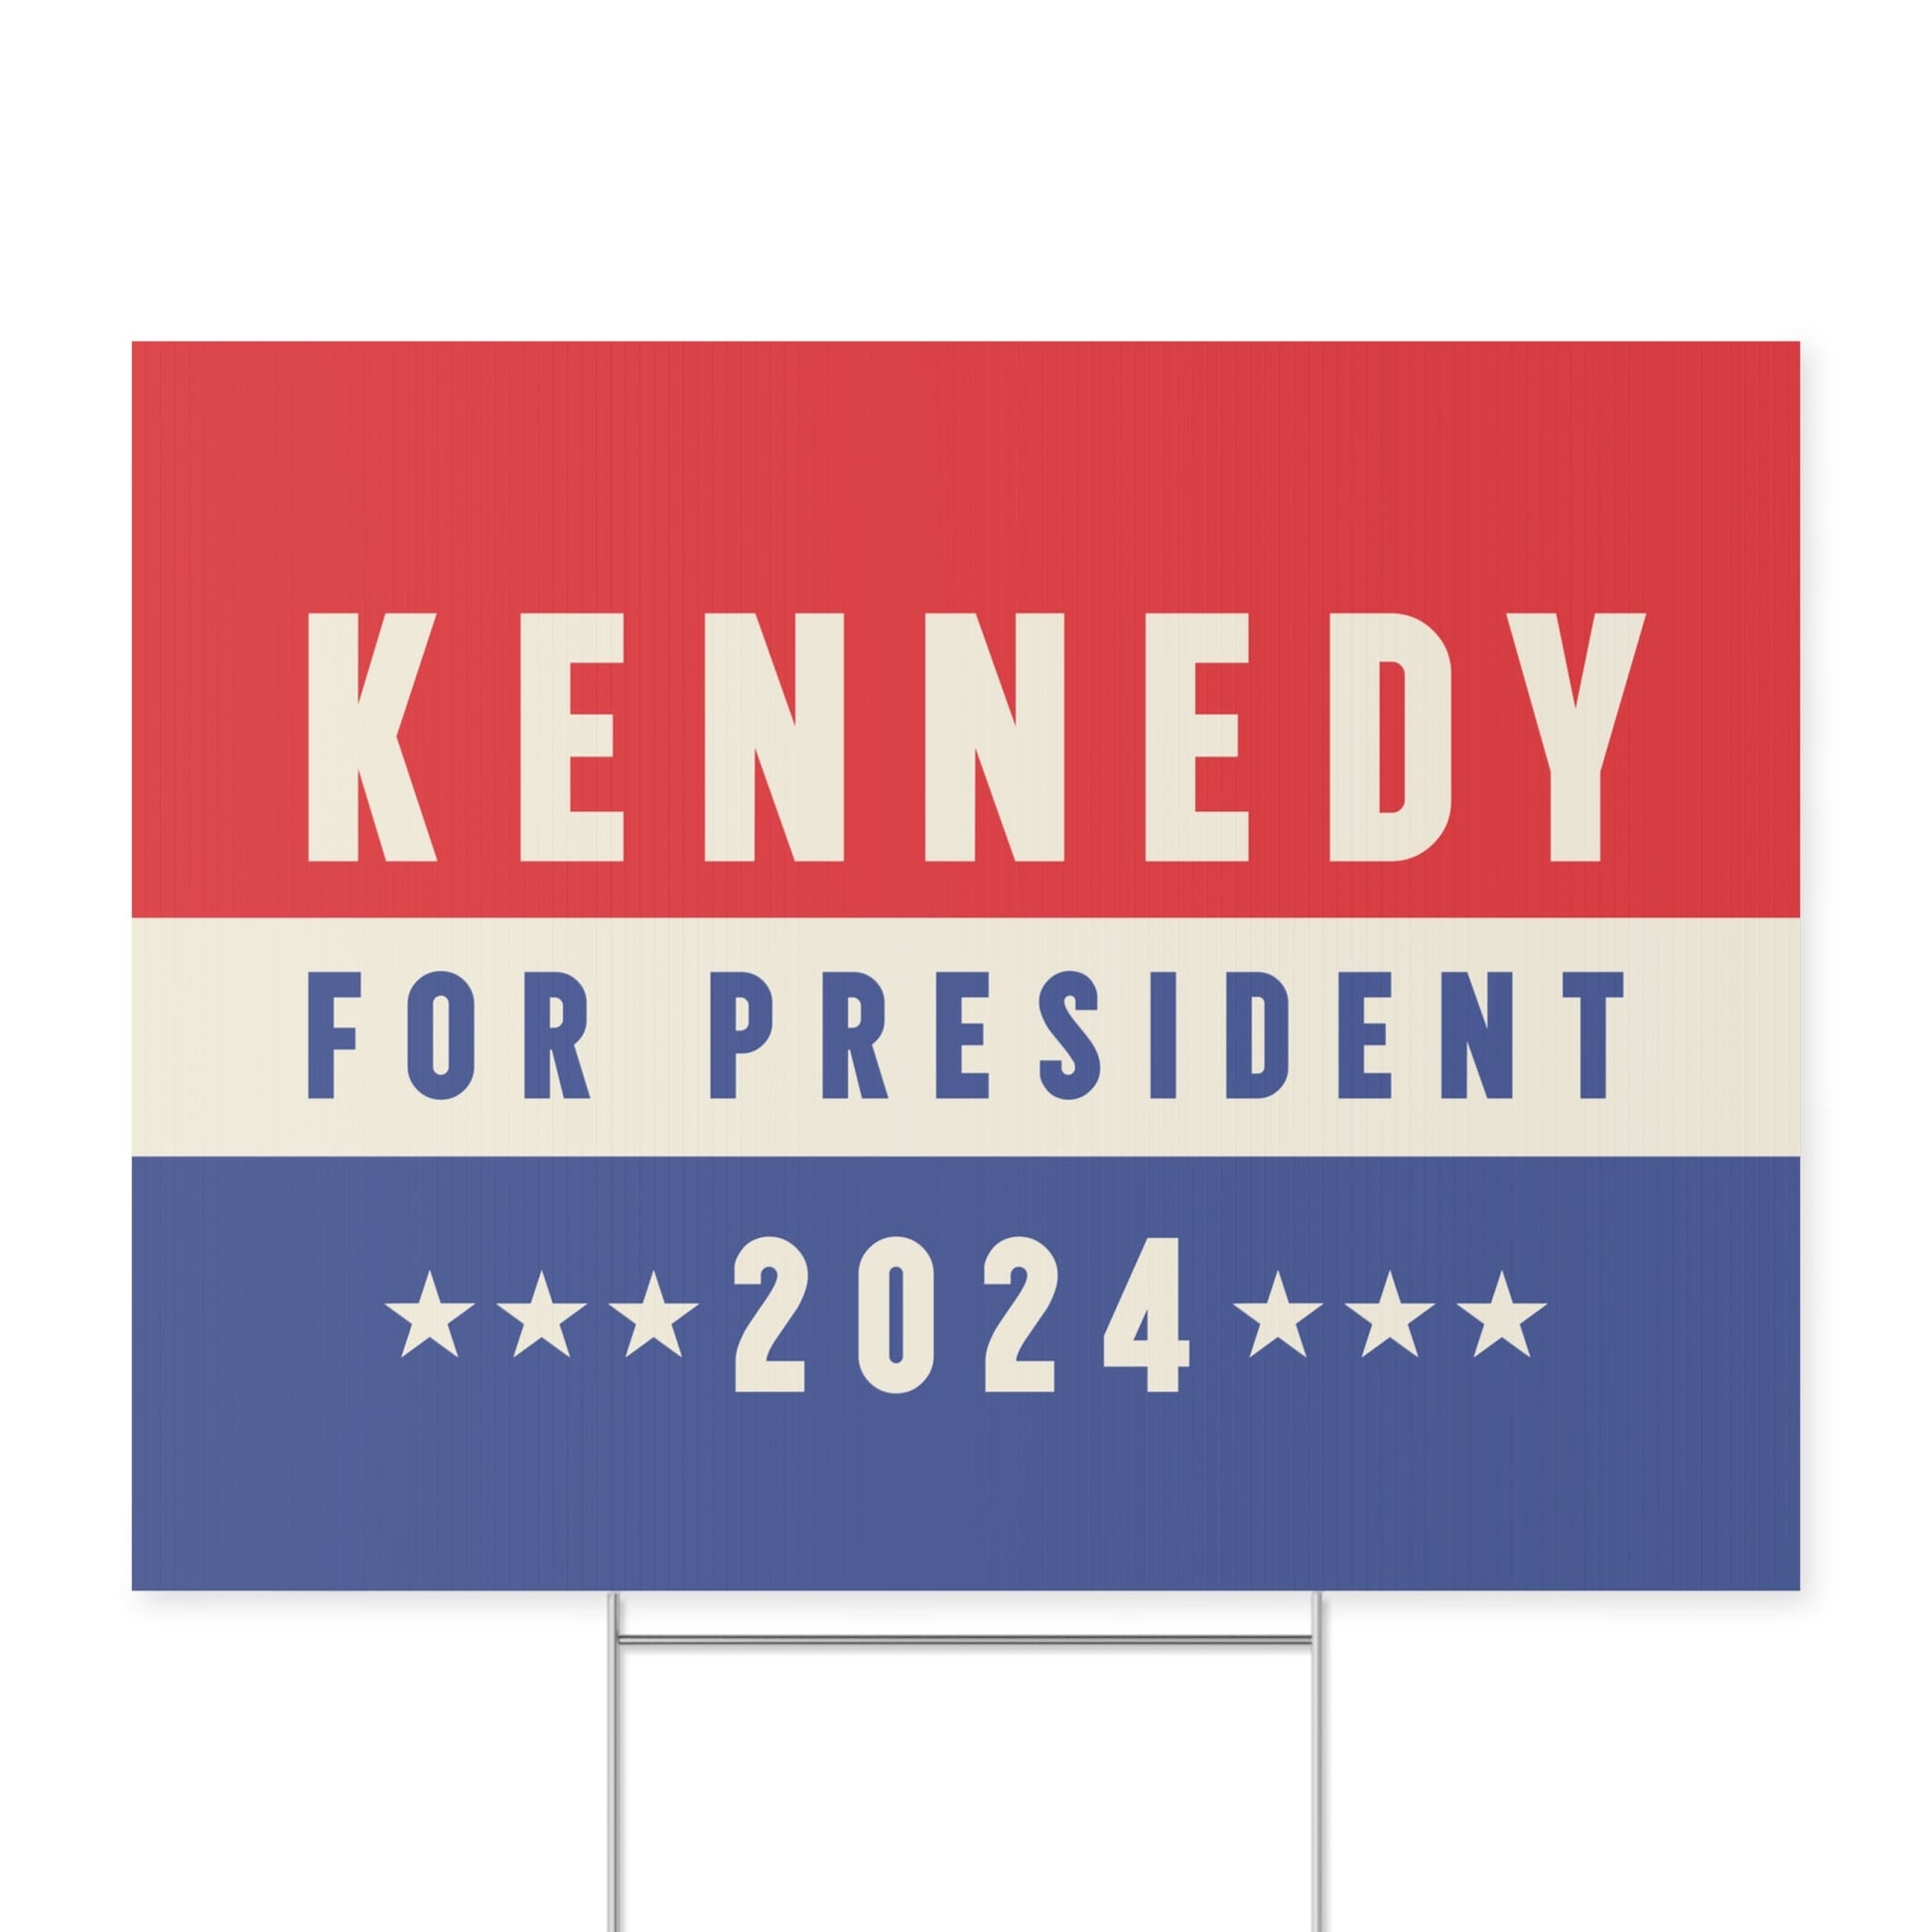 Kennedy for President Vintage Yard Sign - TEAM KENNEDY. All rights reserved